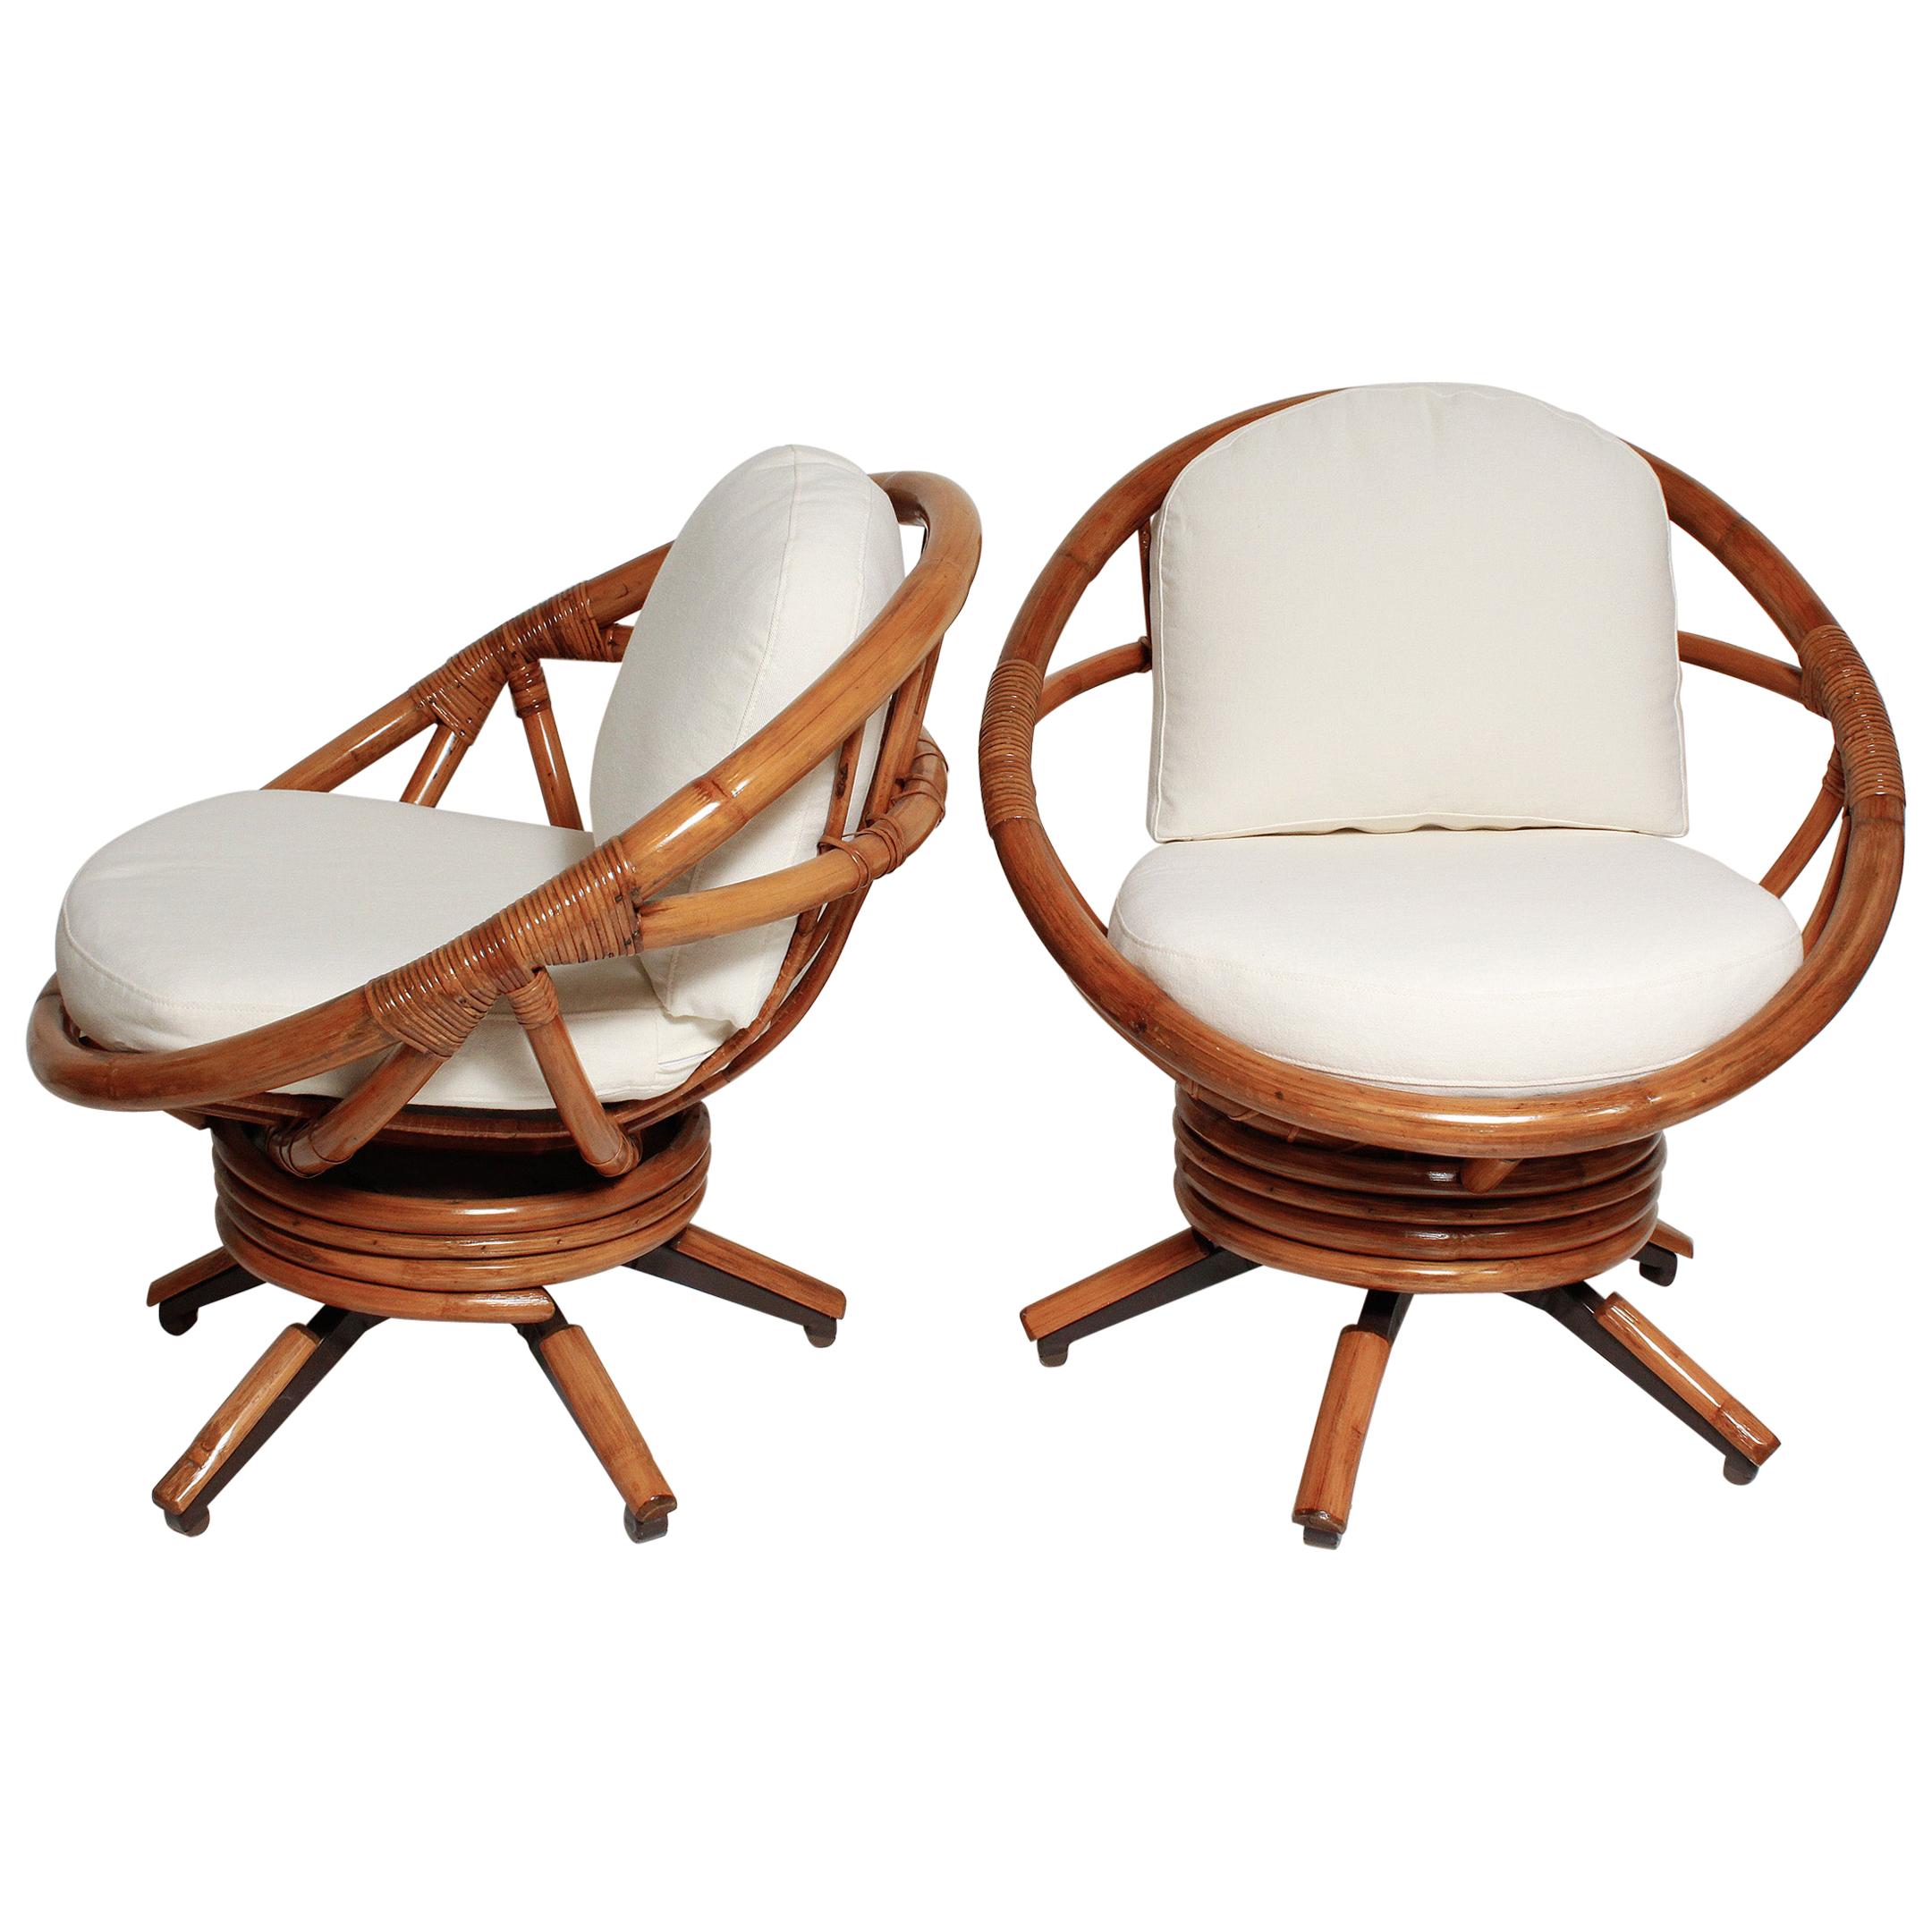 Fully Restored Pair of Bamboo Swivel Chairs, American, circa 1960